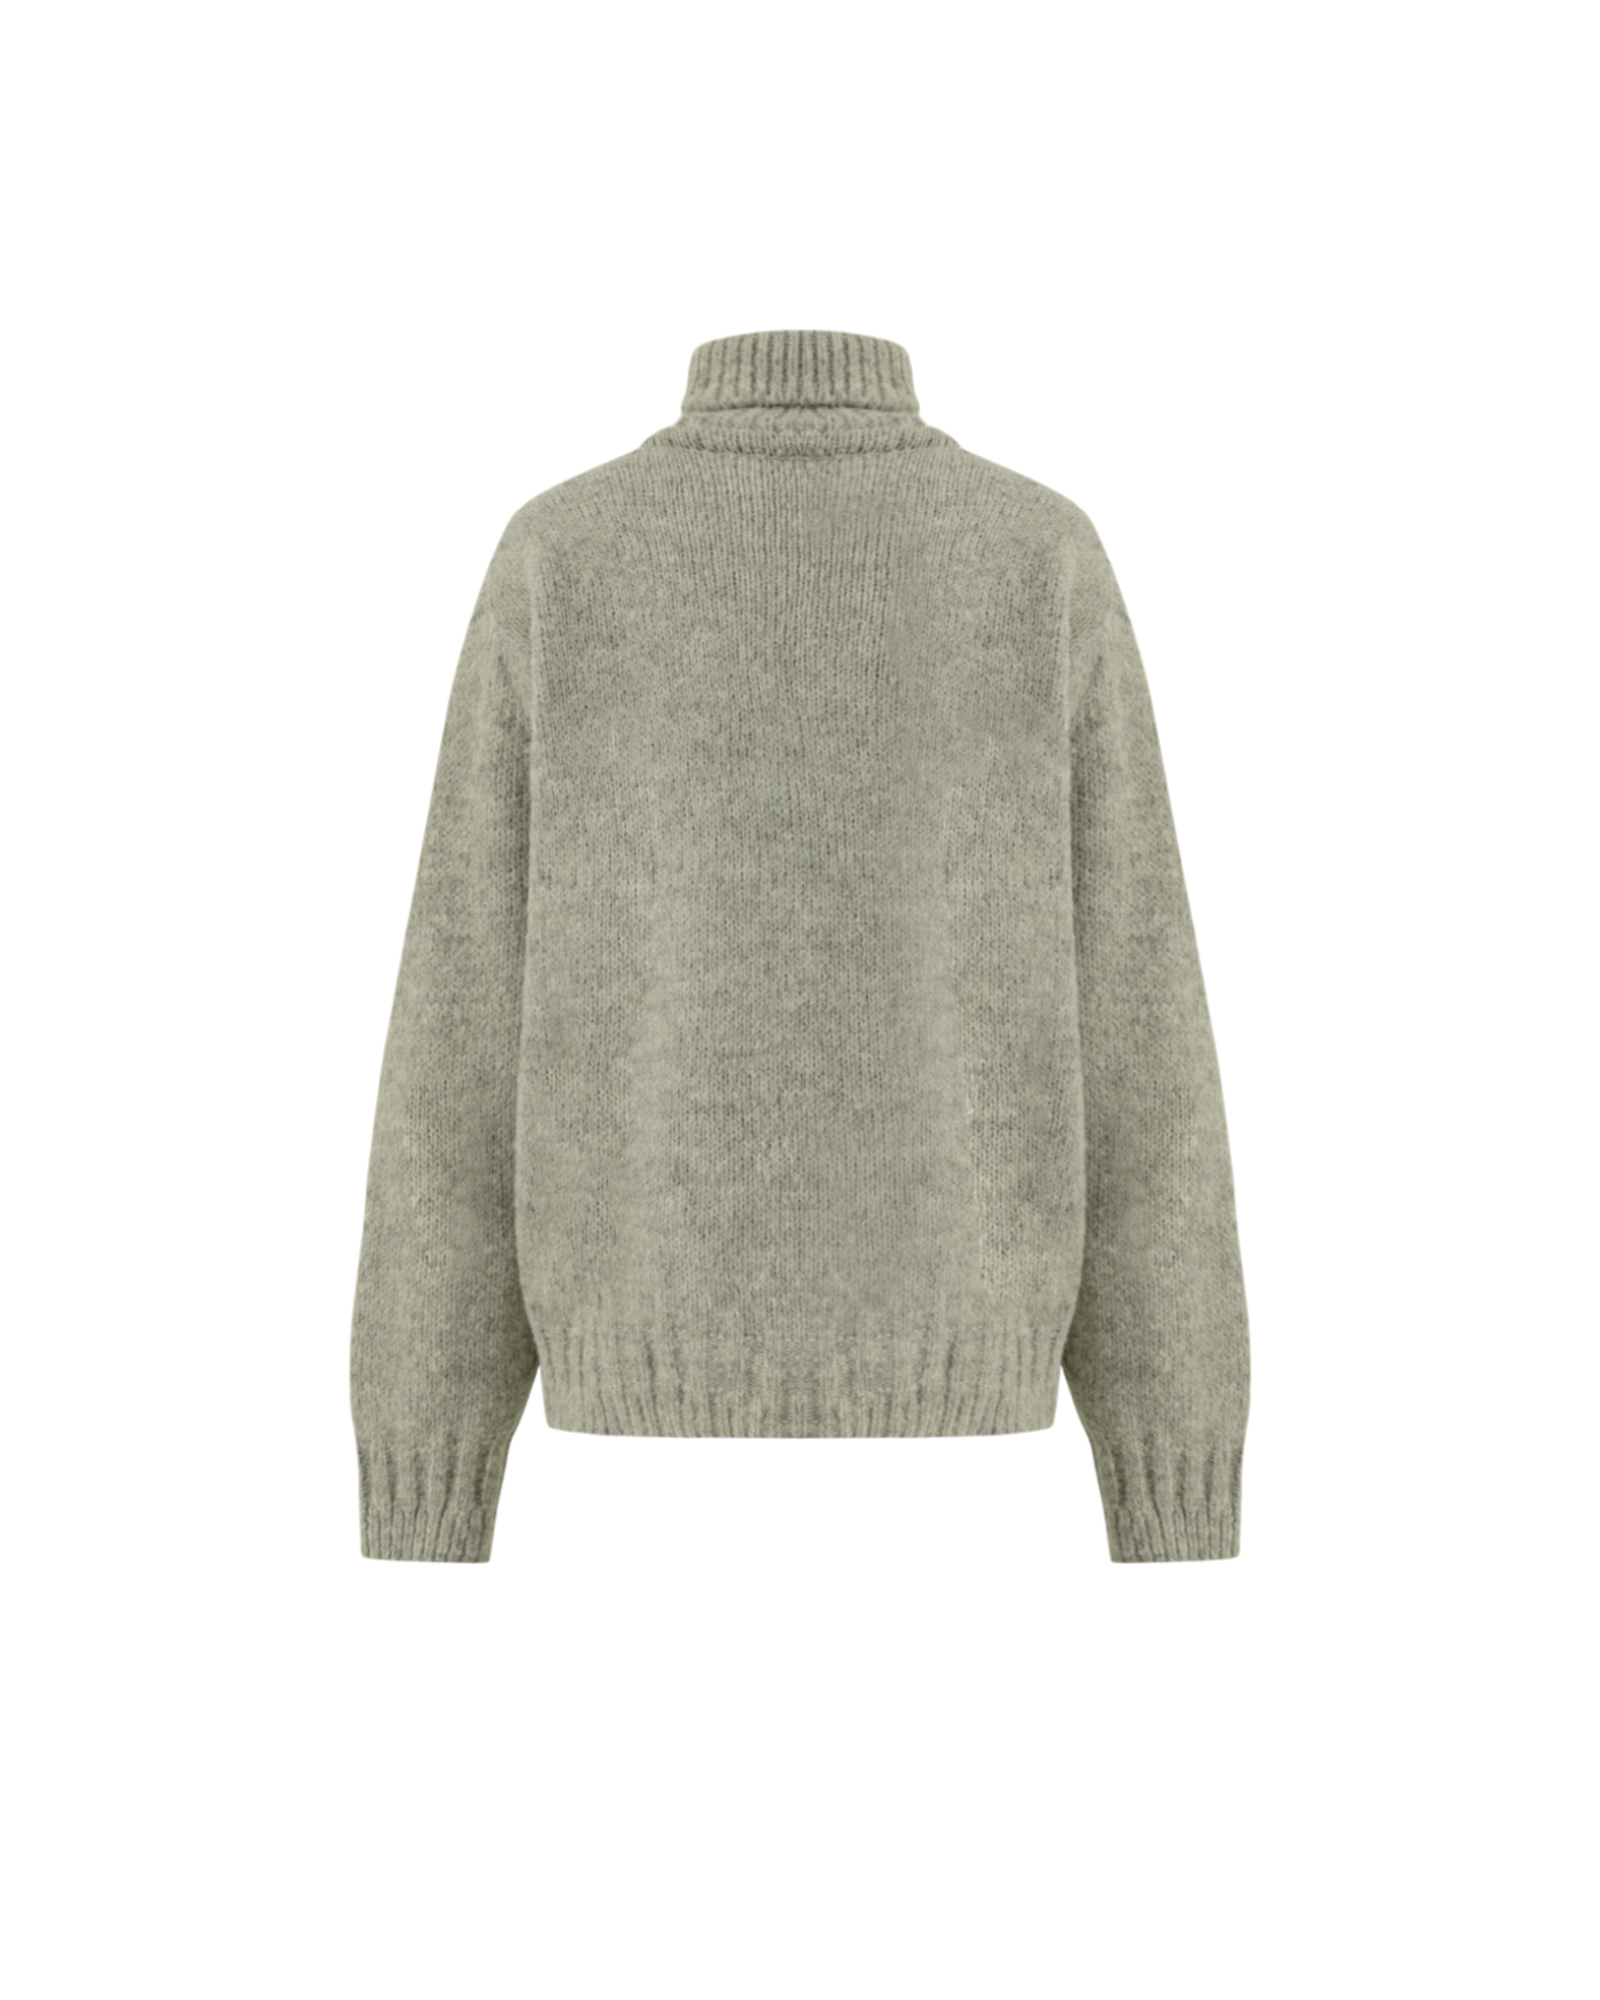 Heavy Turtle Neck Knit In Olive